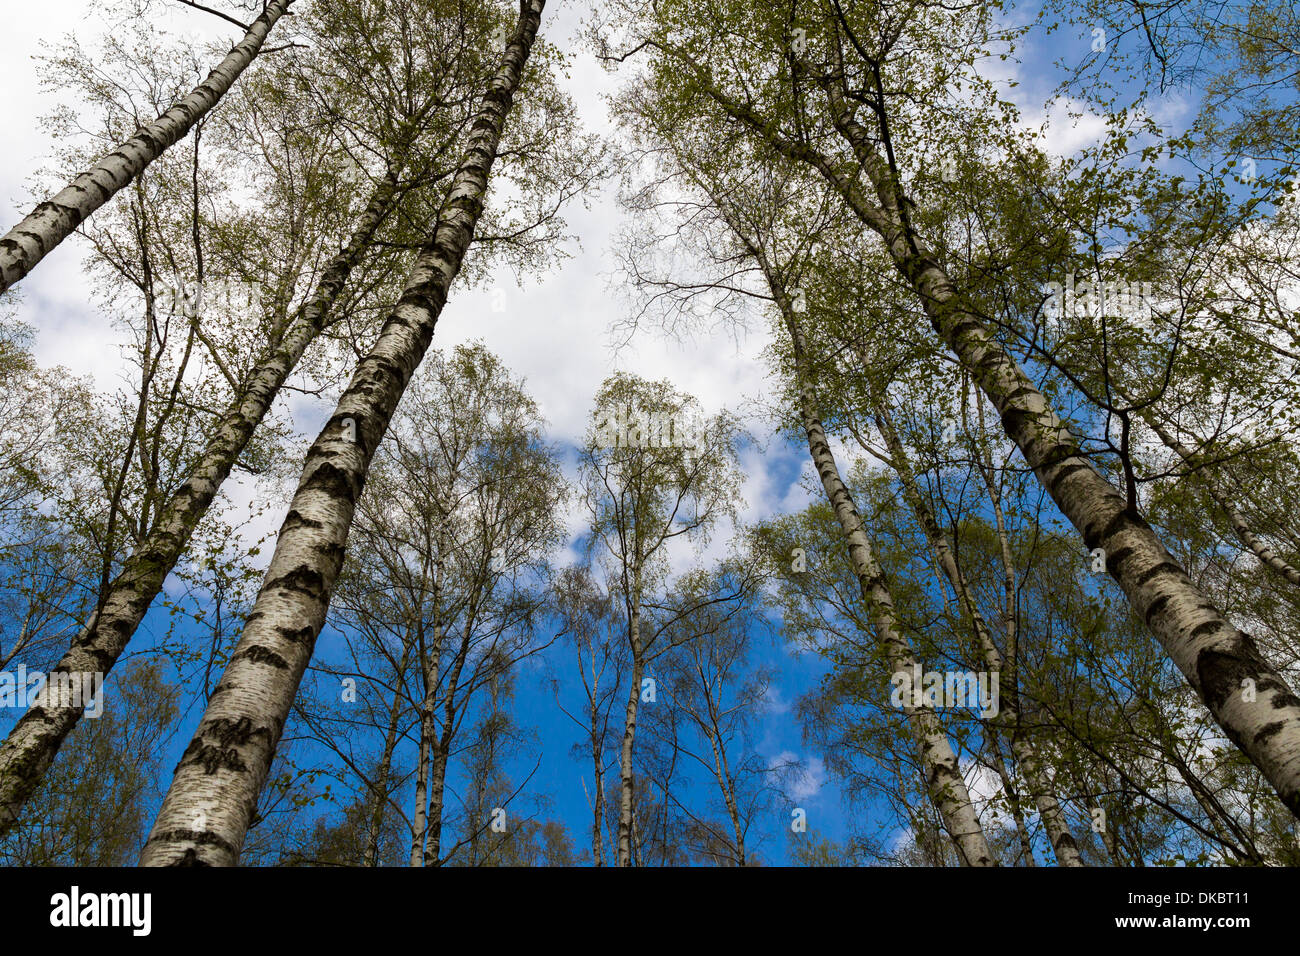 worm's-eye-view of a birch forest. Stock Photo